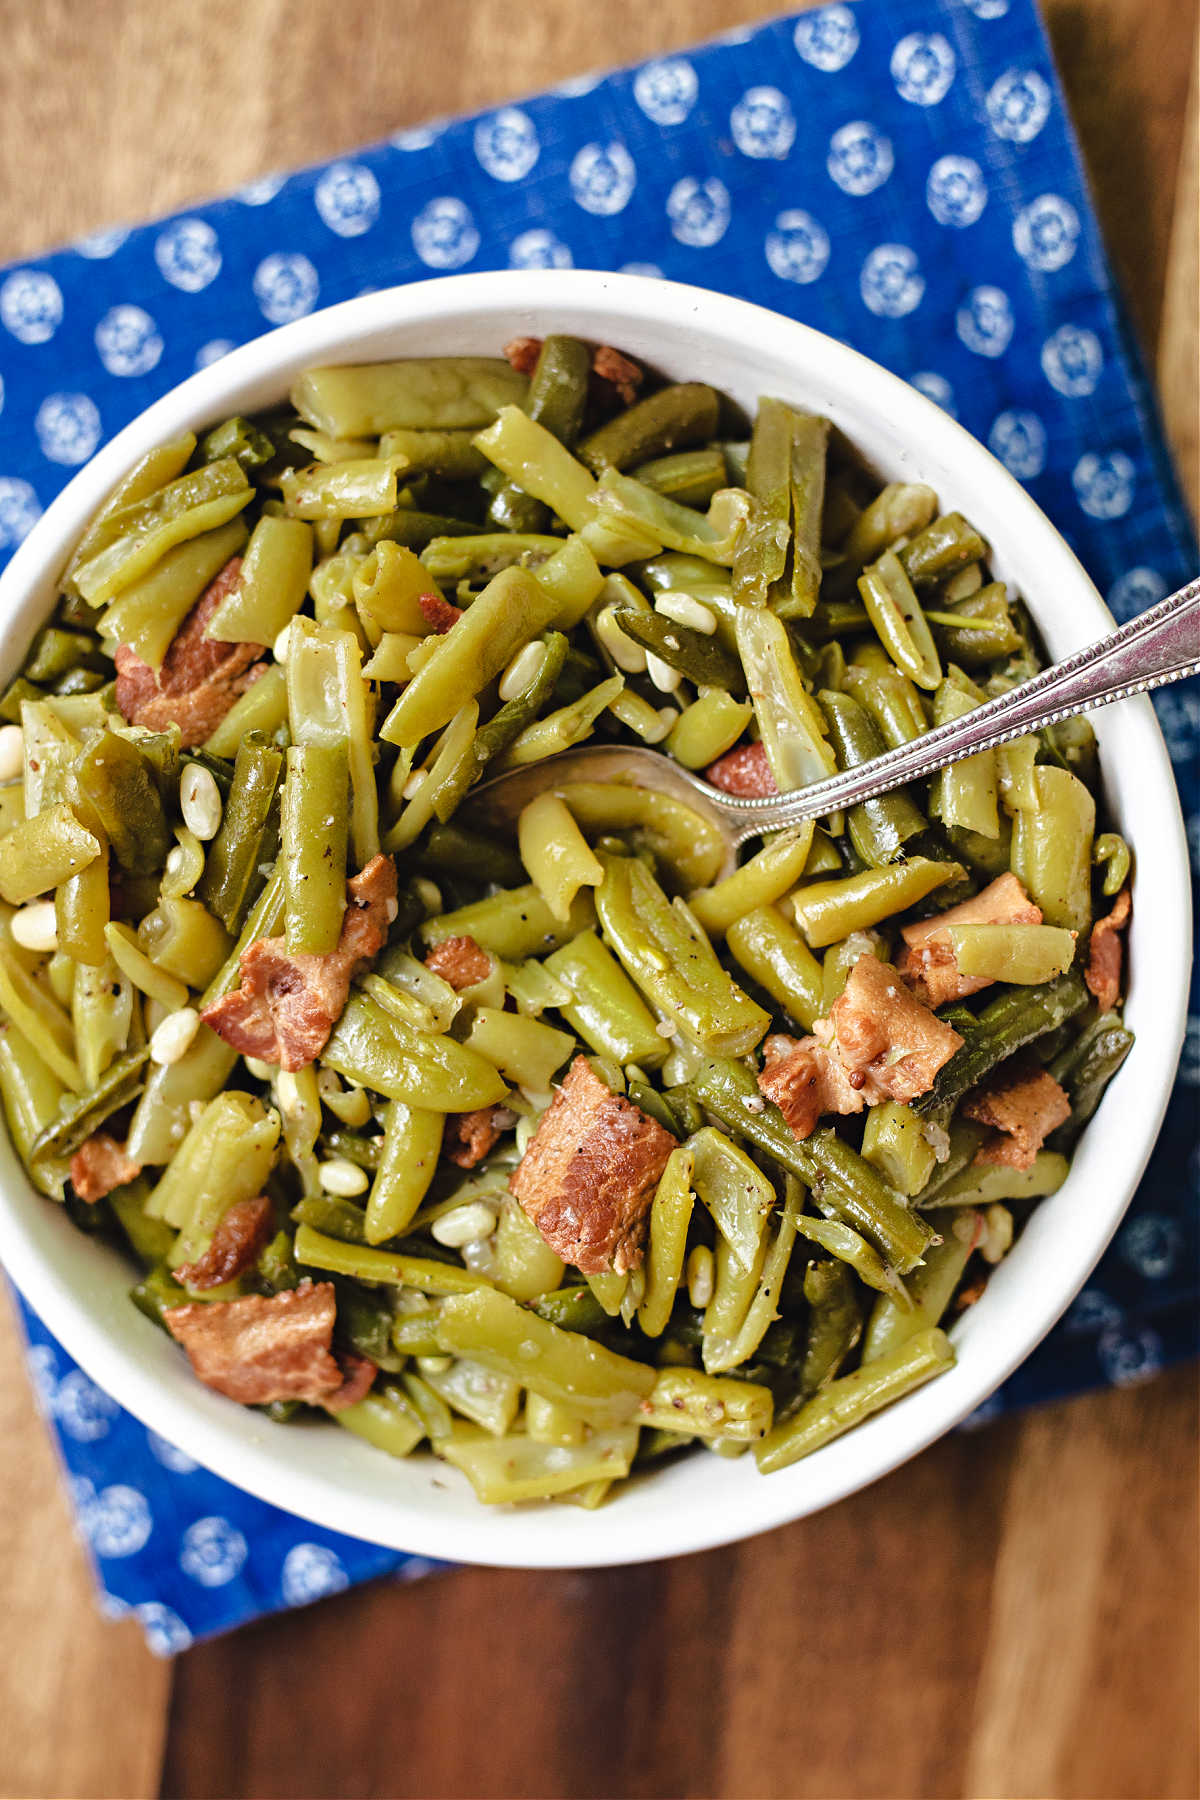 a bowl of green beans with a serving spoon sitting on a blue napkin on a wooden table.